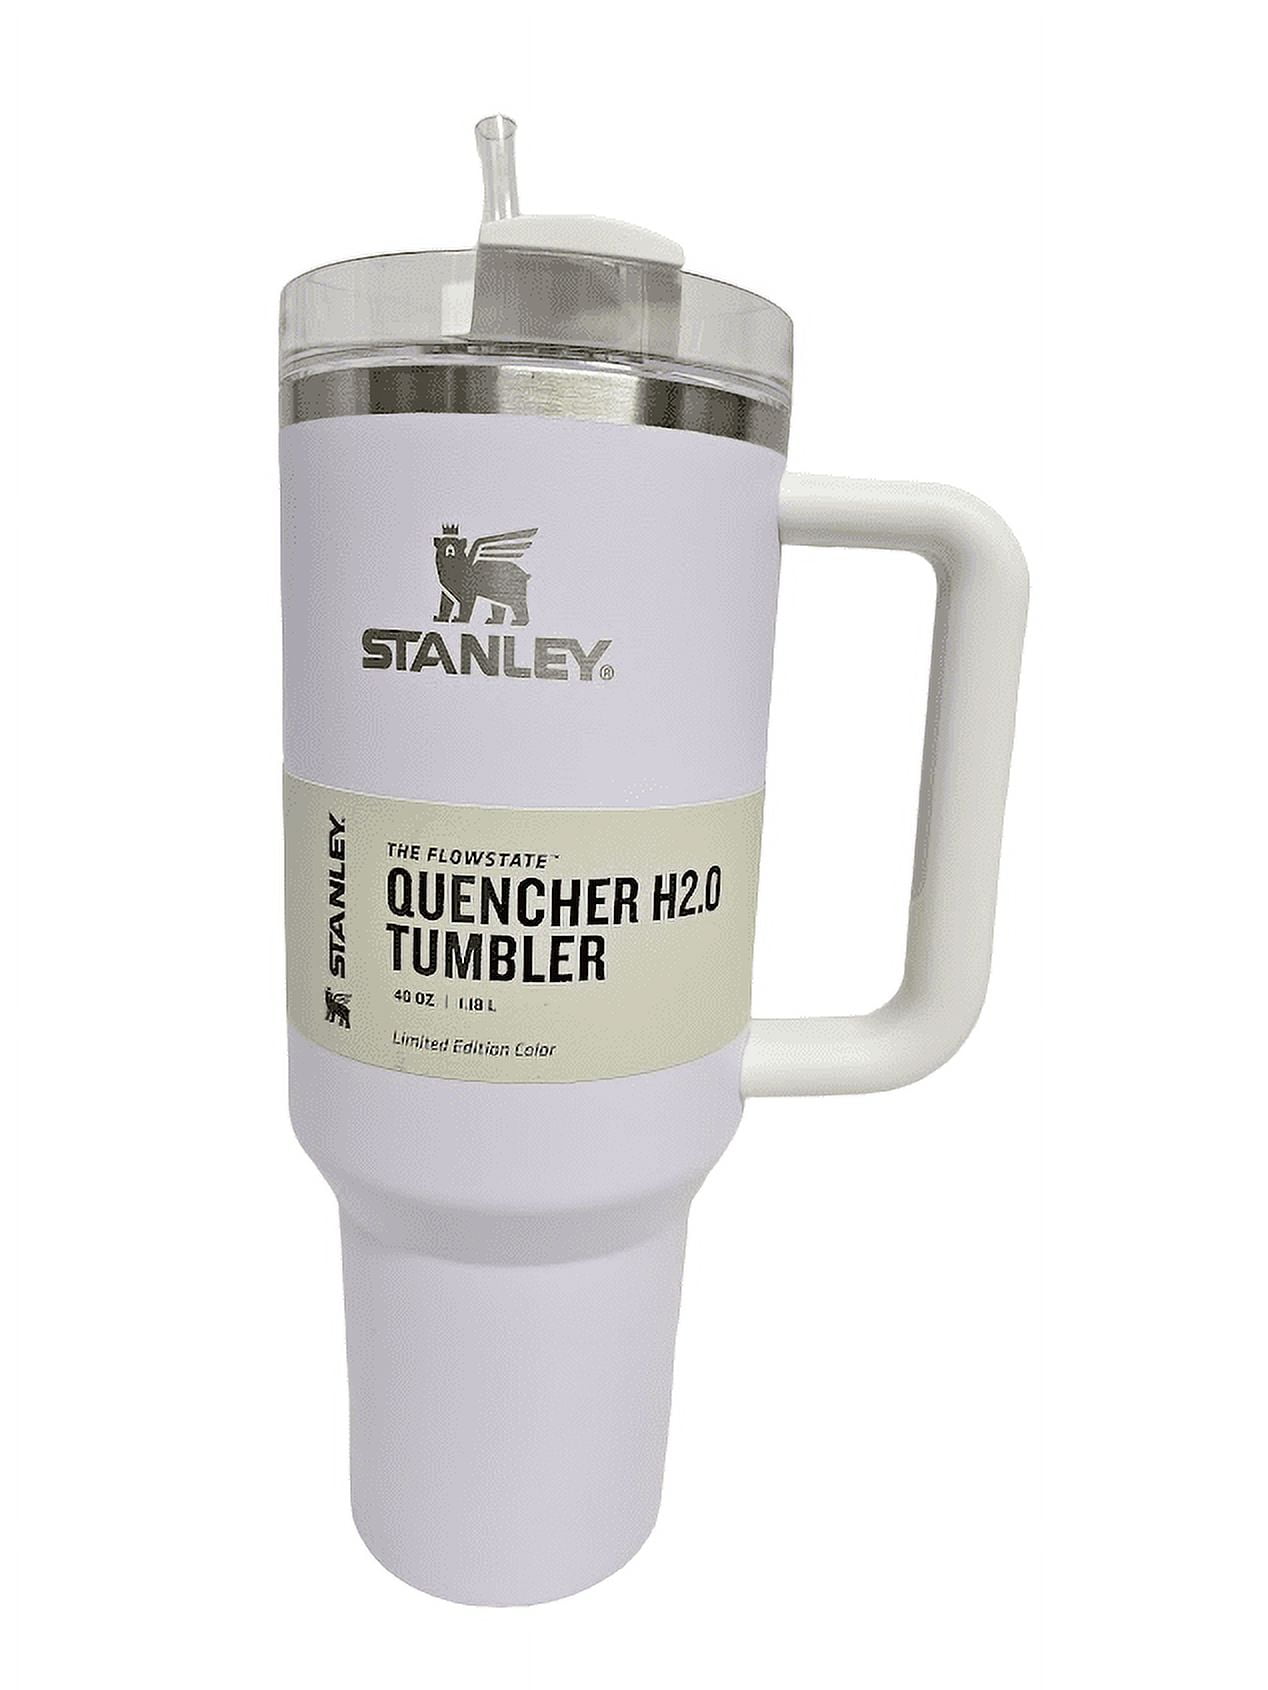 STANLEY Adventure 40oz Stainless Steel Quencher  Tumbler-Wisteria,(10-10824-063): Tumblers & Water Glasses